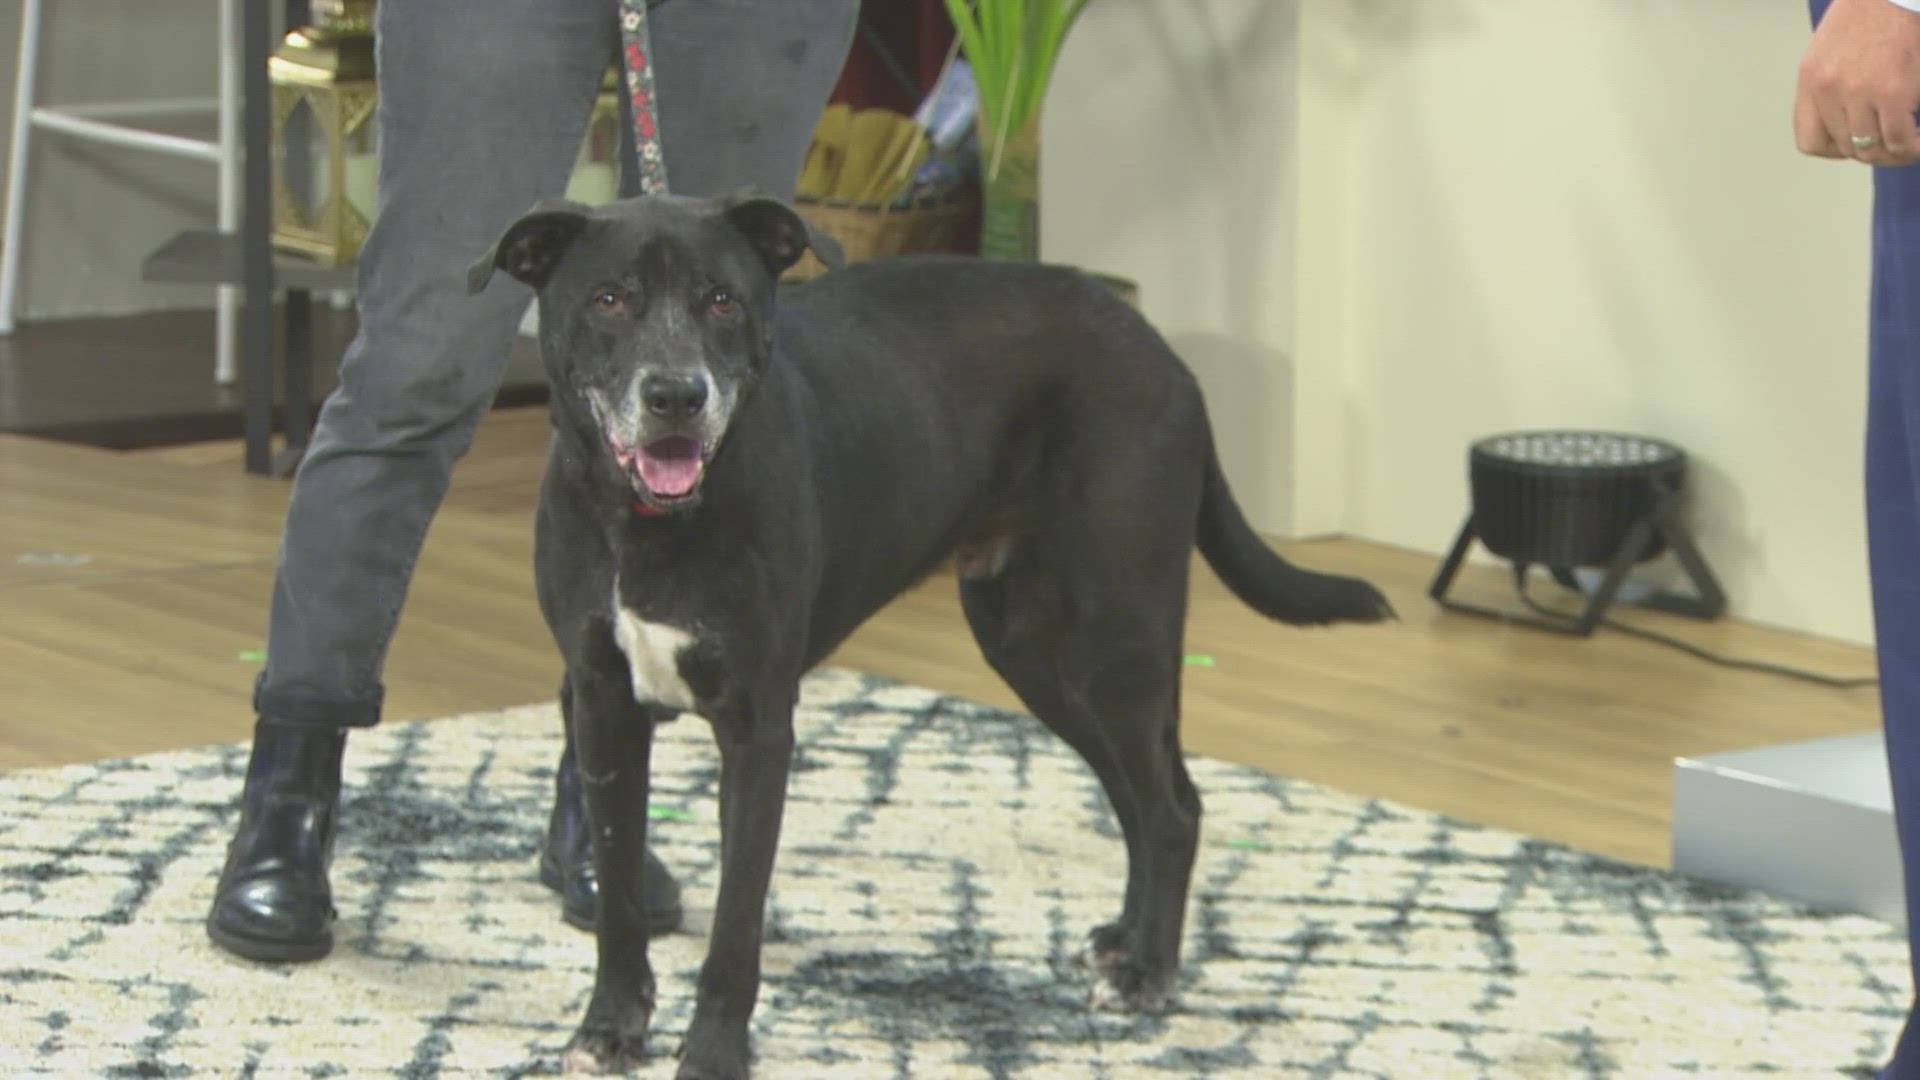 The Jacksonville Humane Society, located at 8464 Beach Blvd., will be having an adoption event Friday until 10 p.m.